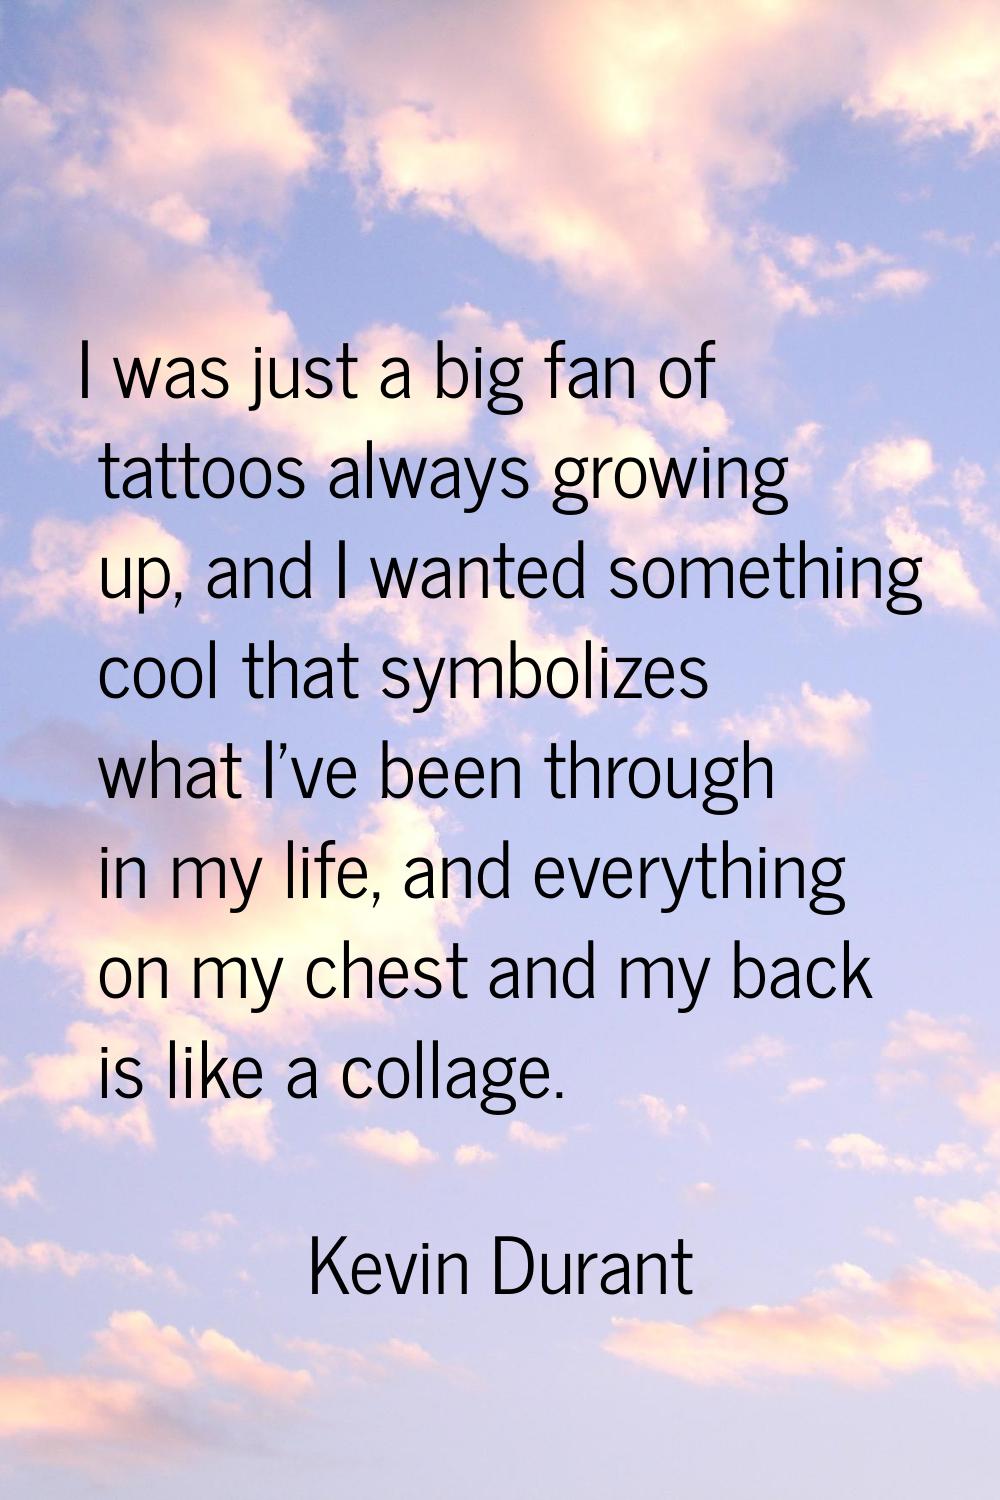 I was just a big fan of tattoos always growing up, and I wanted something cool that symbolizes what